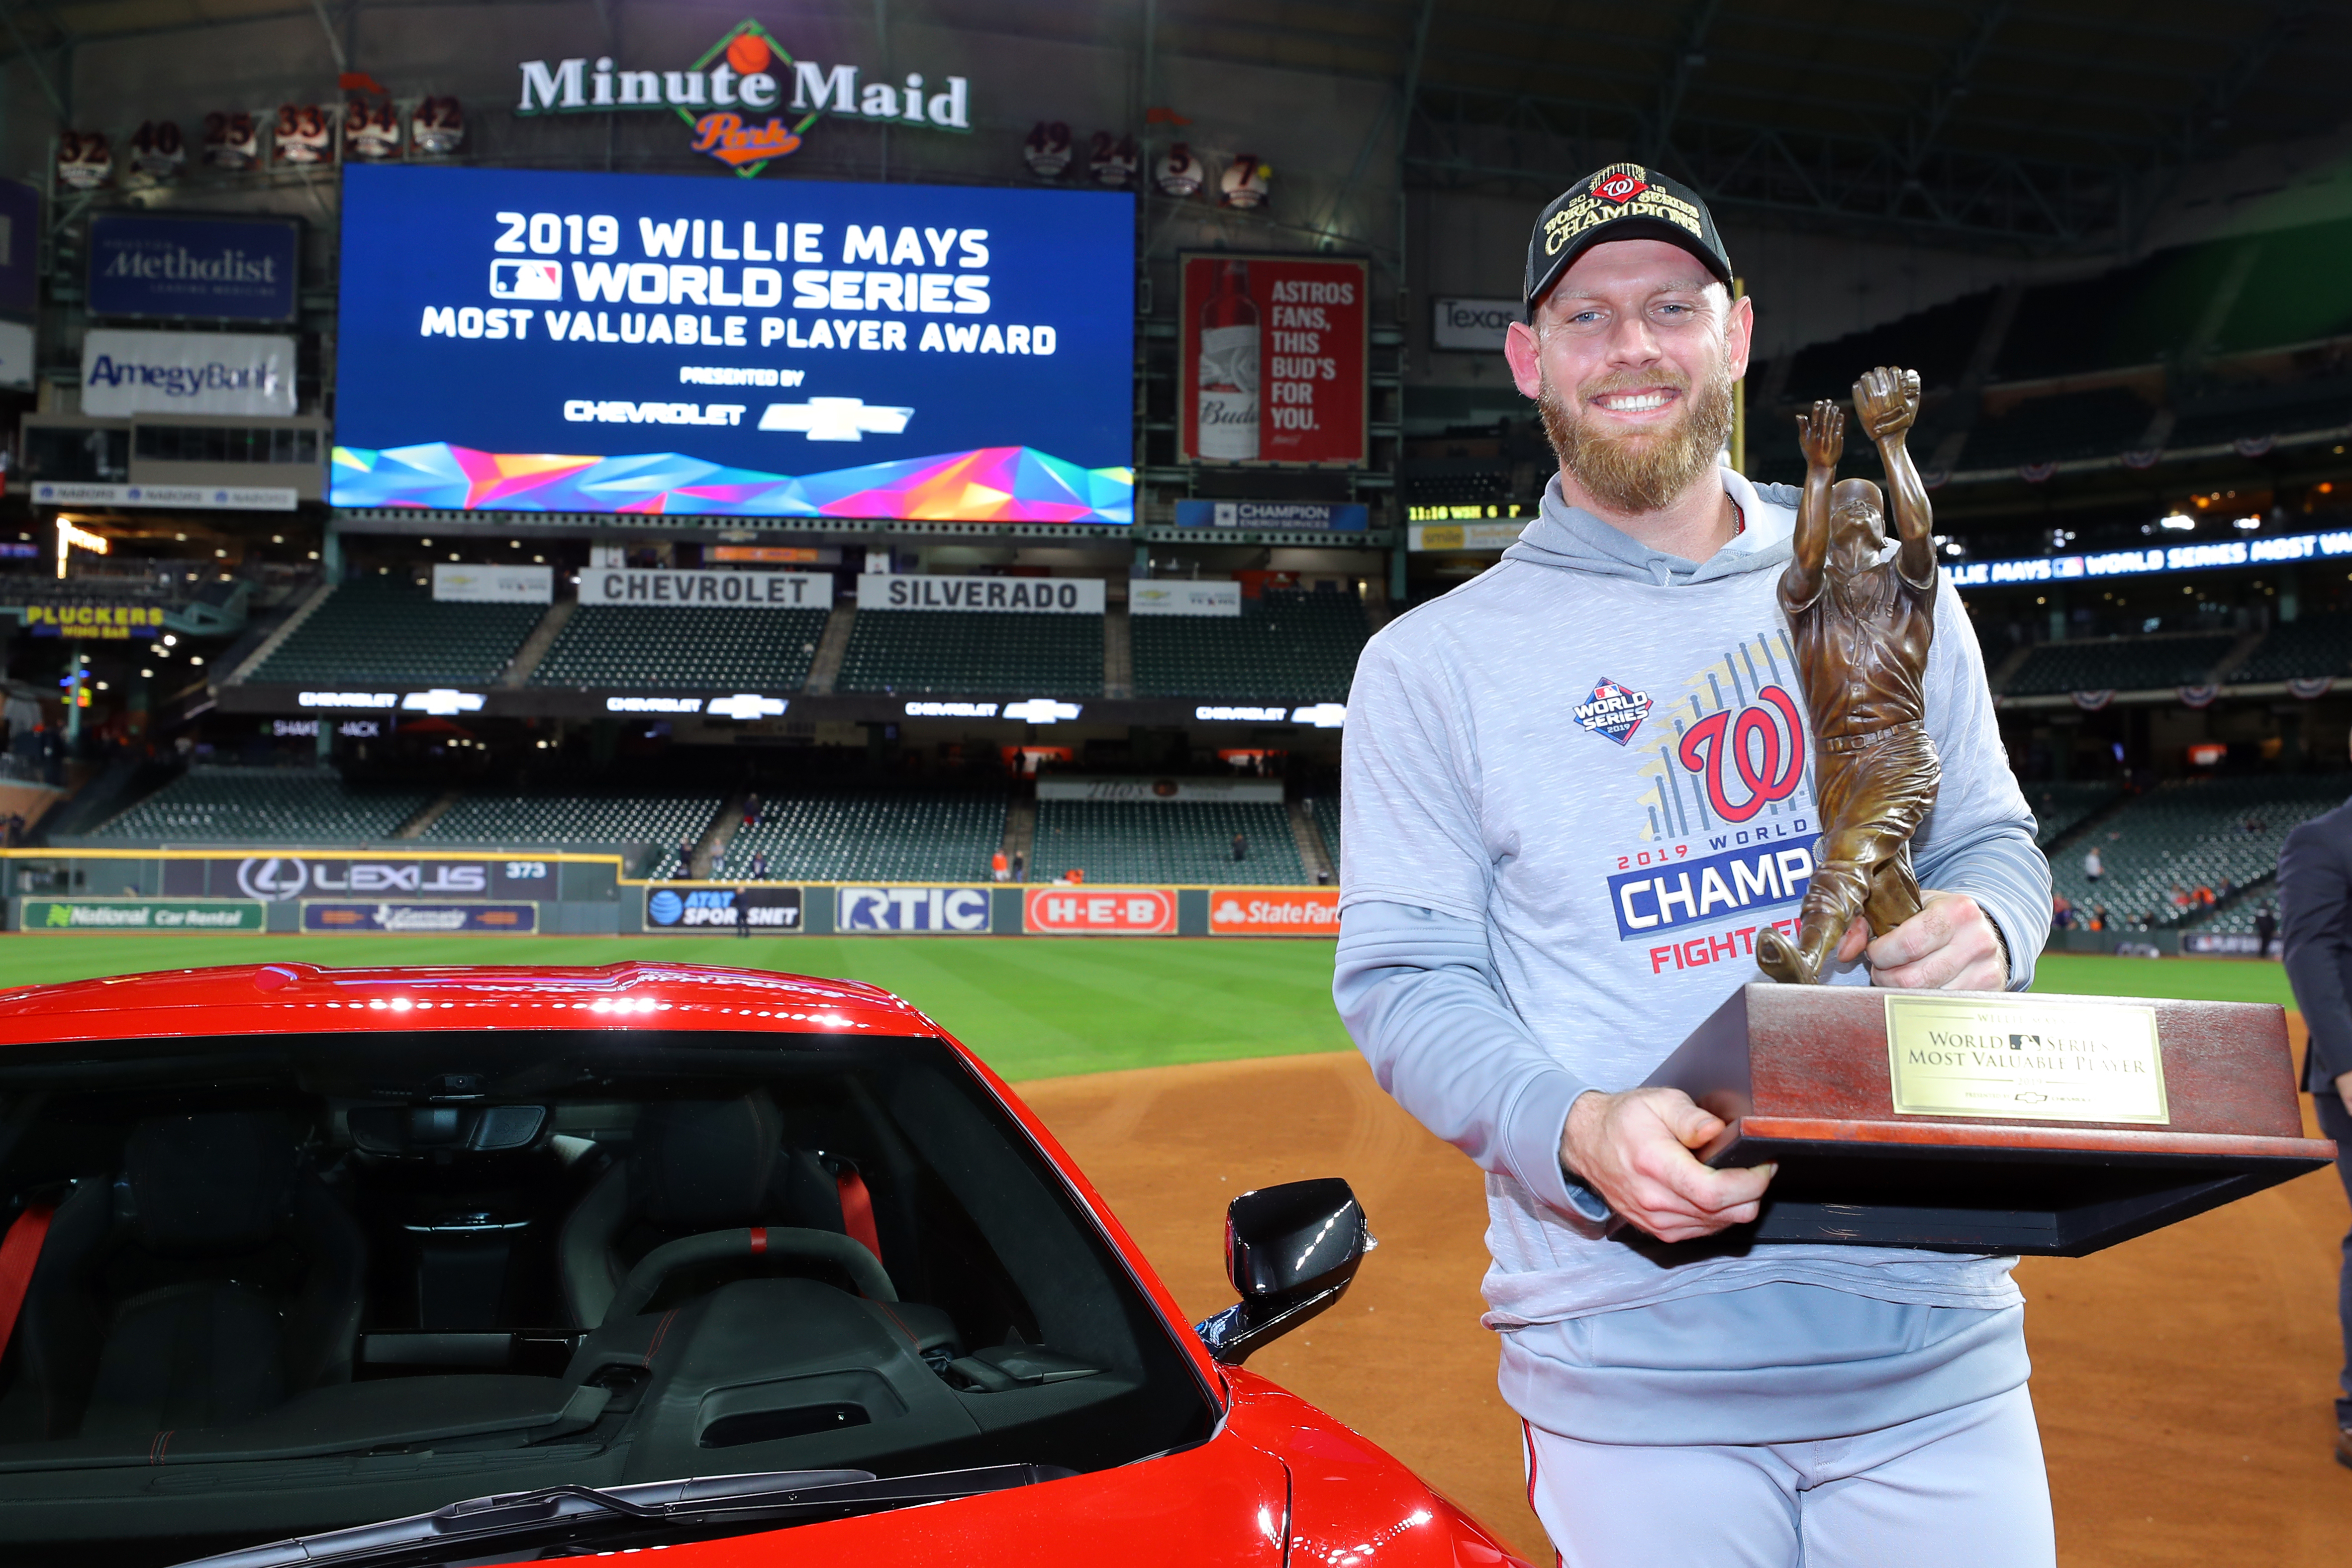 Pitcher Stephen Strasburg of the Washington Nationals receives the Willie Mays World Series MVP Trophy after Game 7 of the World Series against the Houston Astros at Minute Maid Park in Houston, Texas, October 30, 2019. /CFP